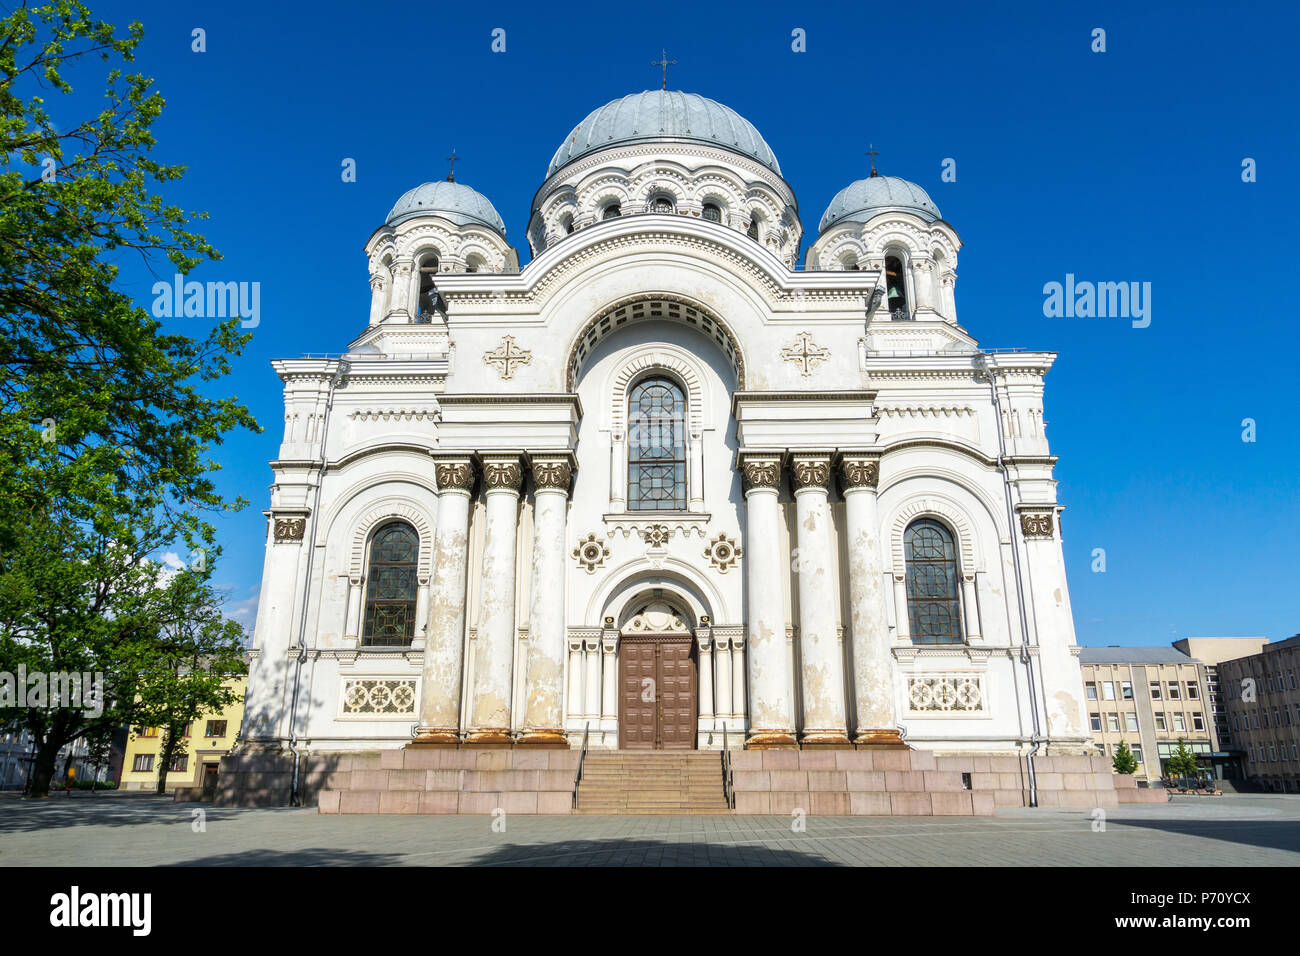 Lithuania, Front view on Sankt Michael the Archangel Church in Kaunas Stock Photo